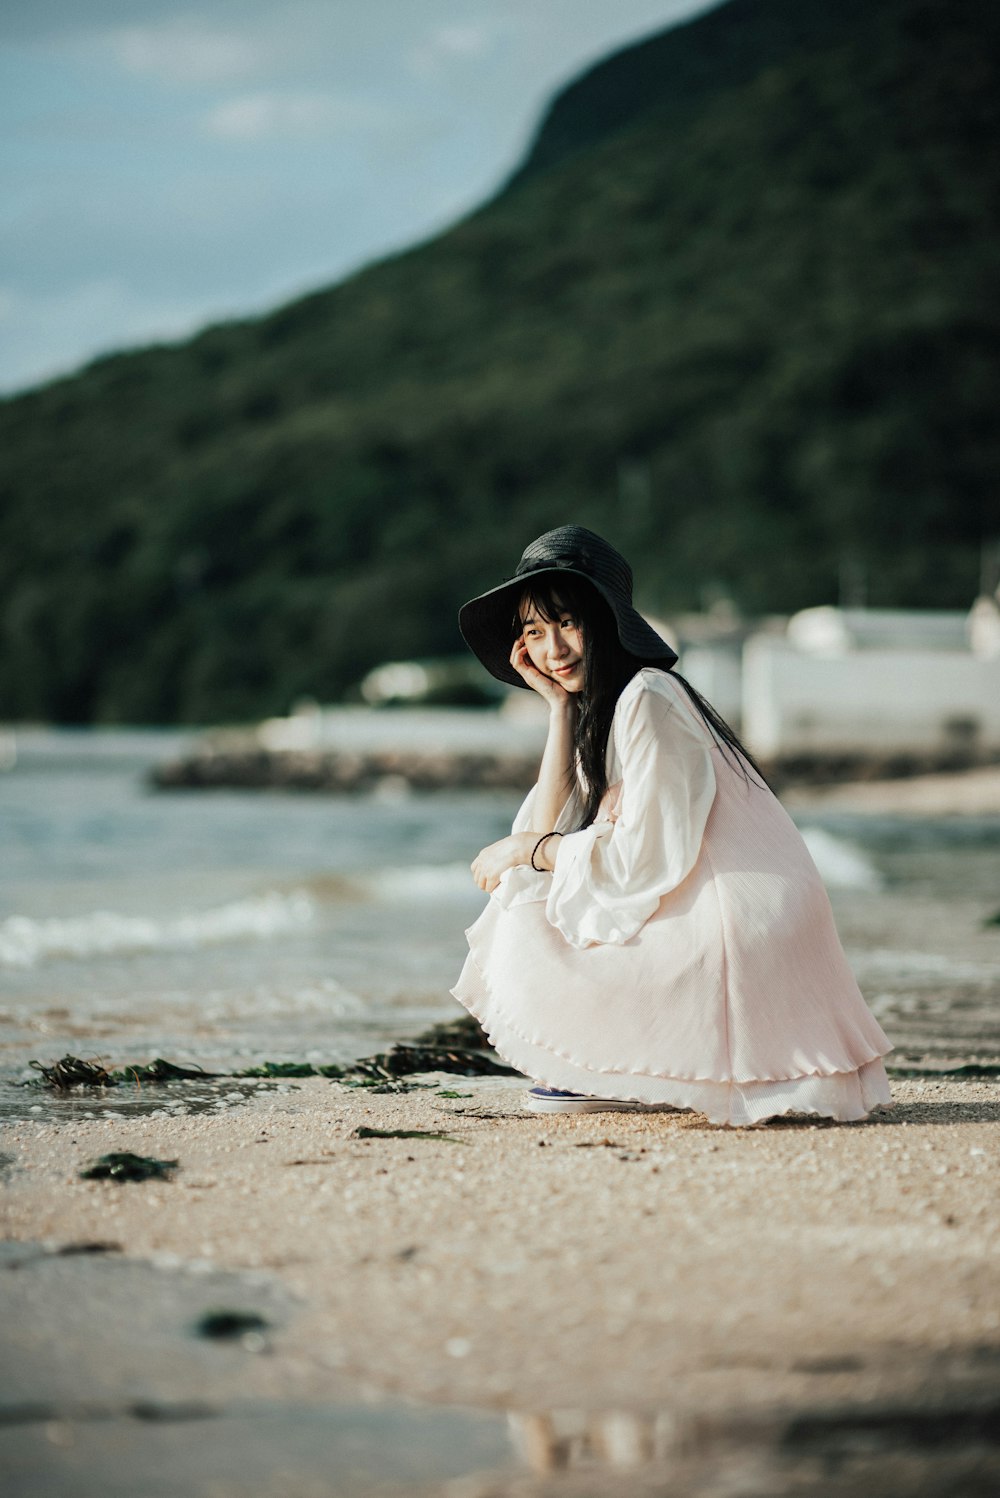 woman in white dress and black hat sitting on beach shore during daytime